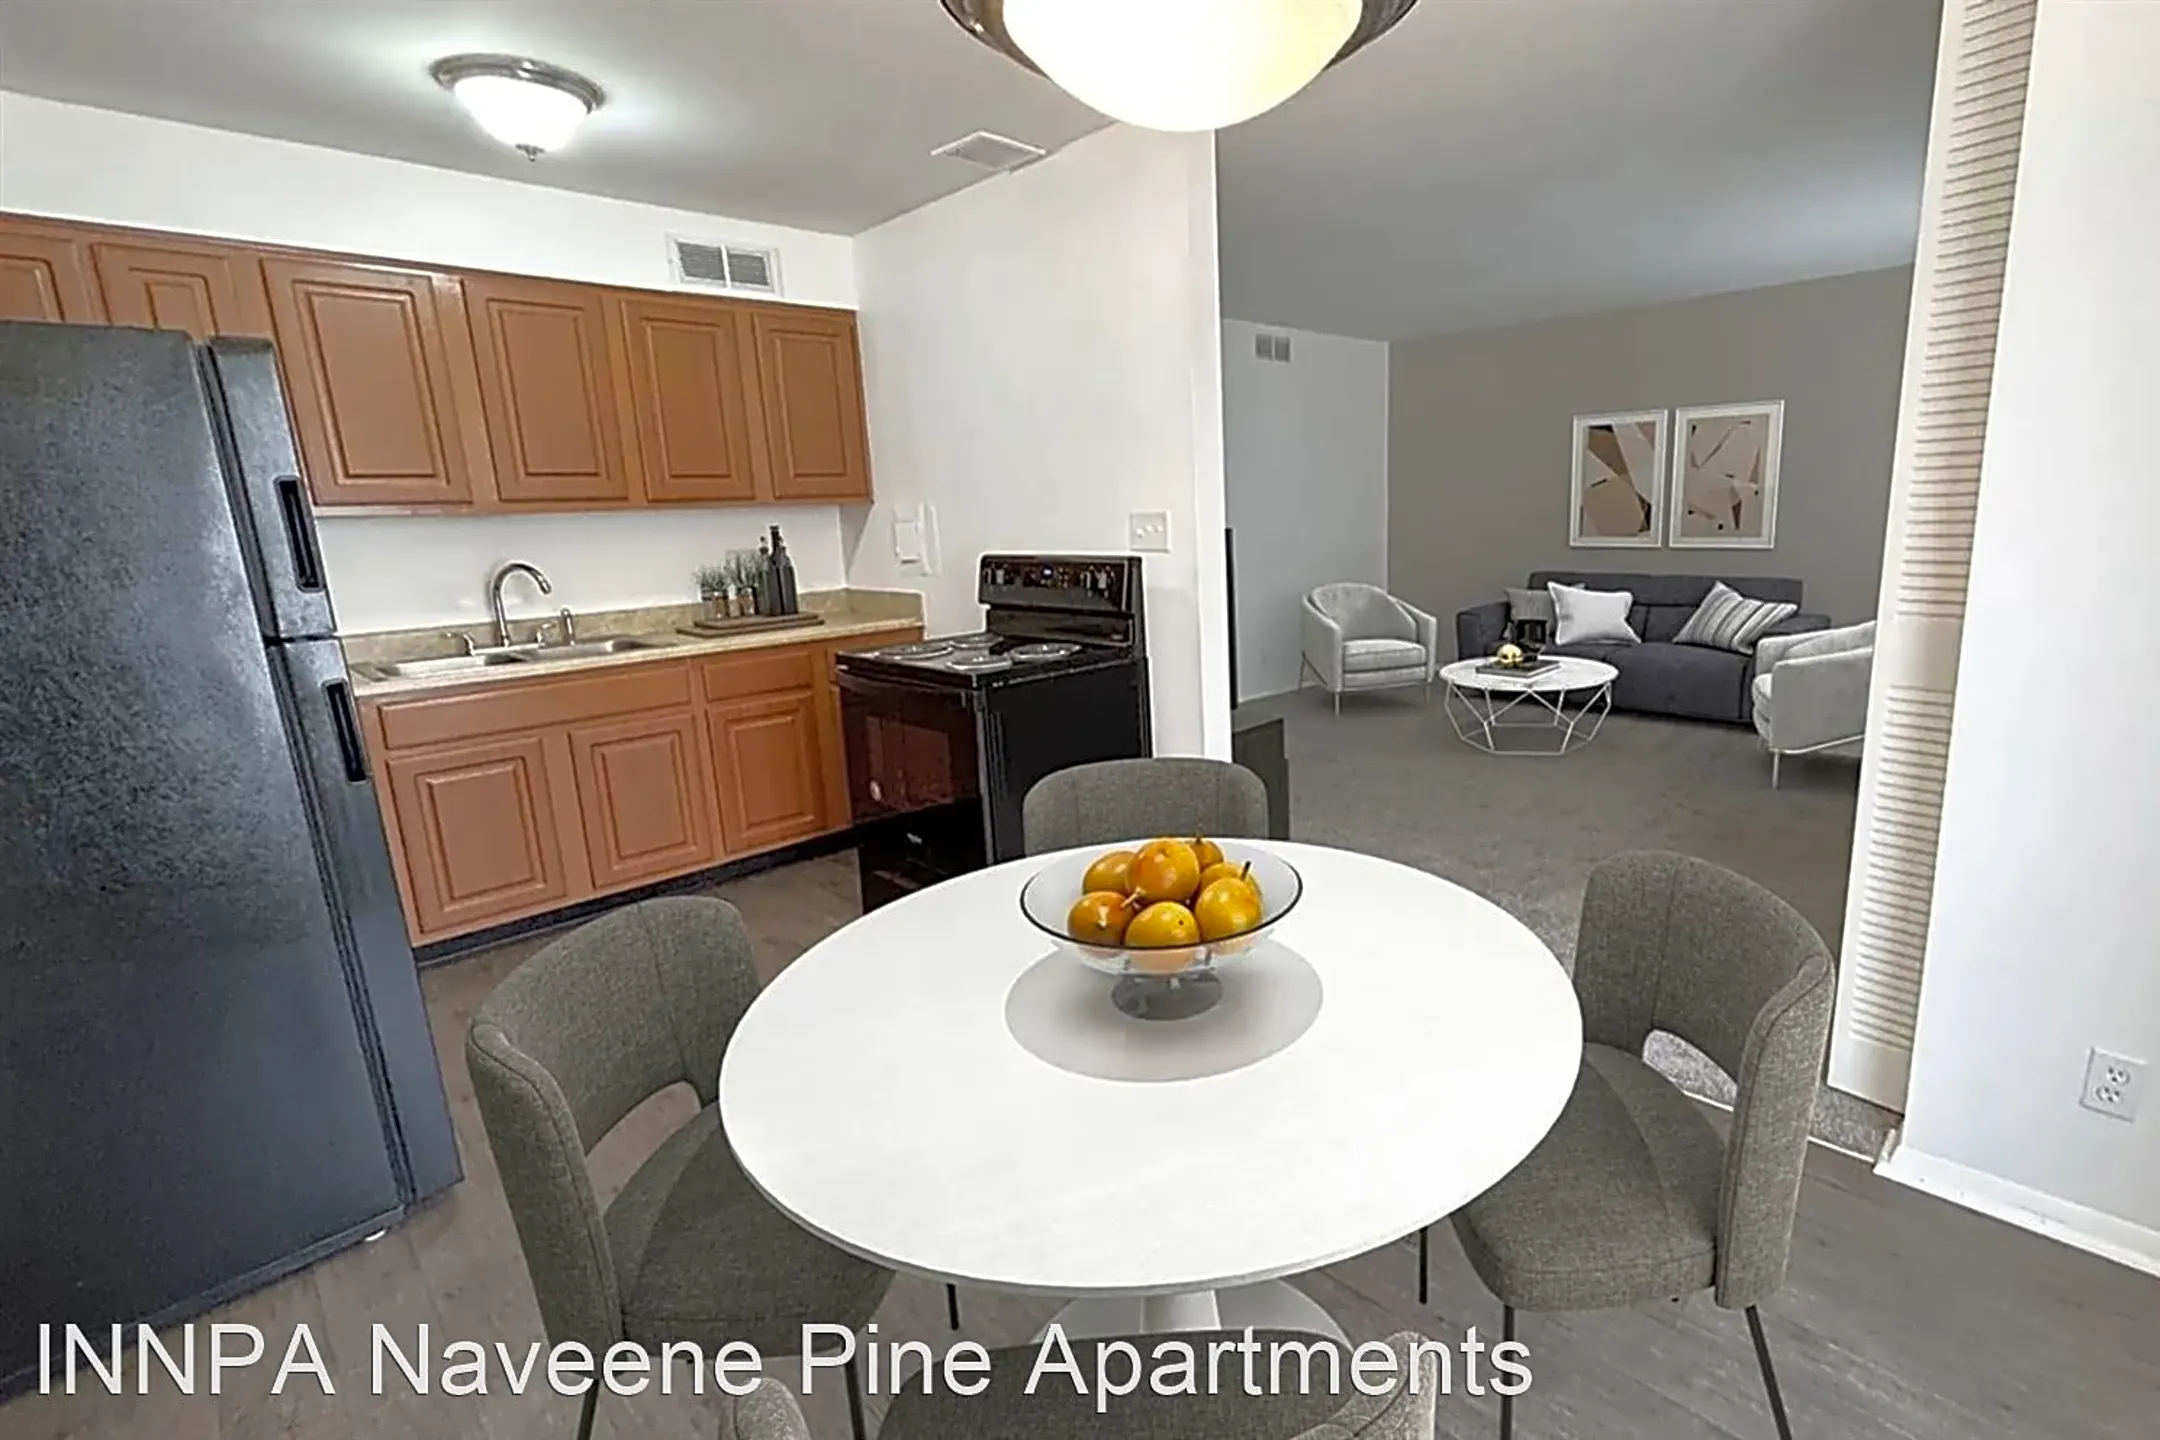 Dining Room - Naveen Pine Apartments - Evansville, IN